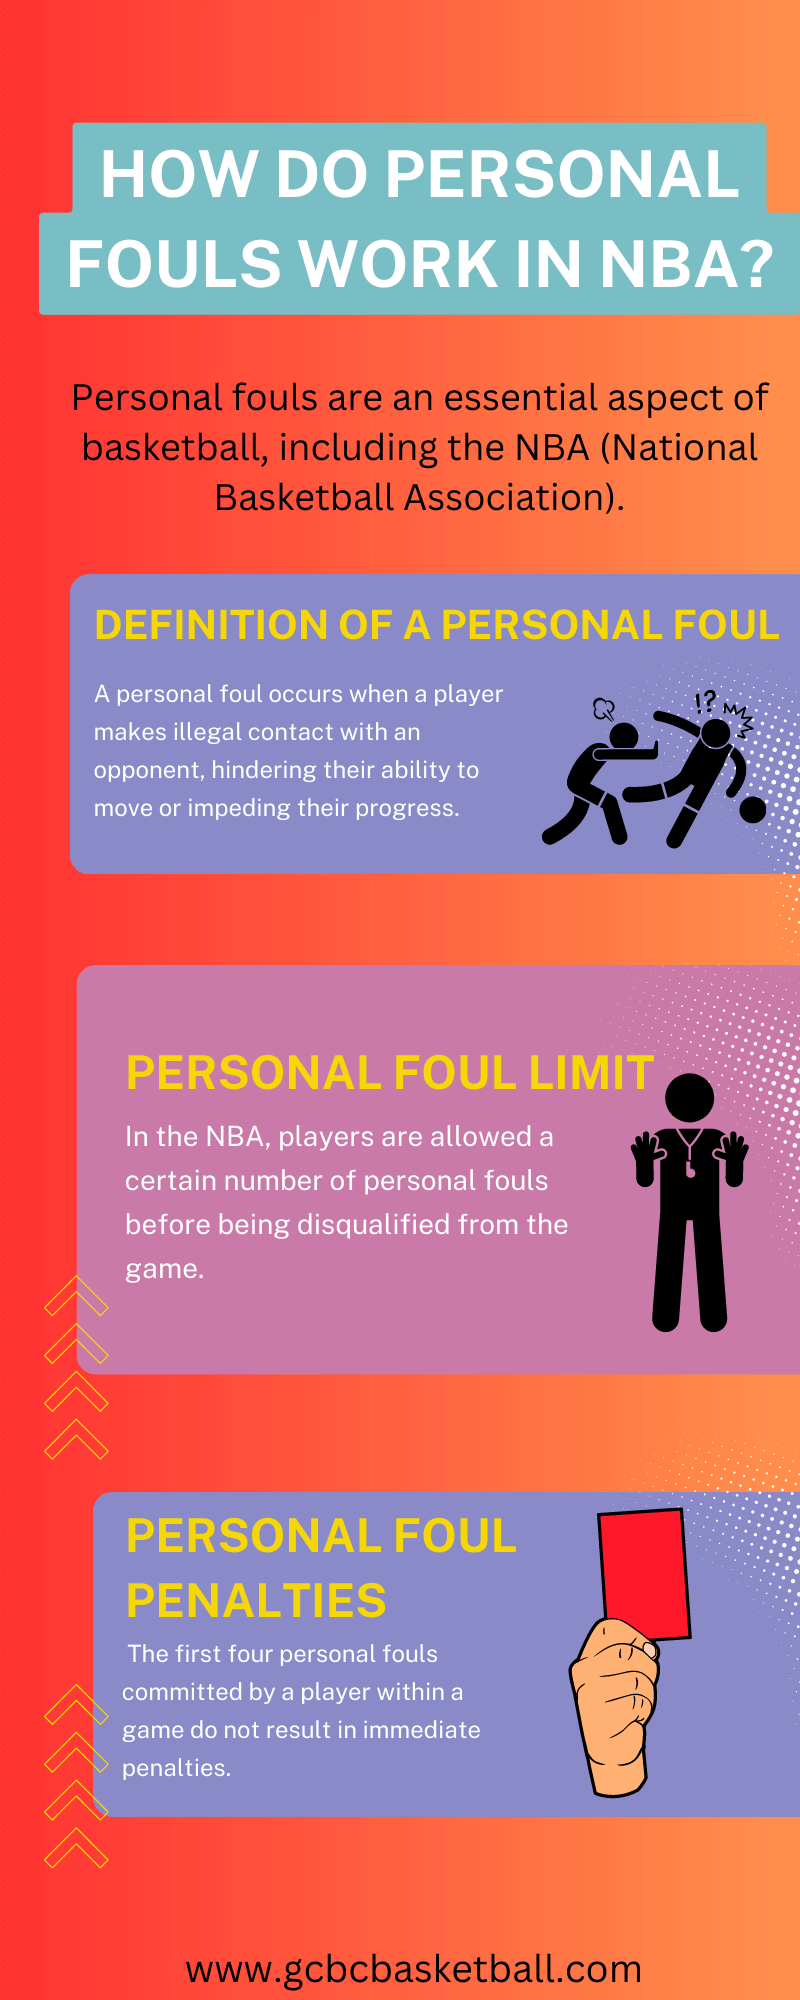 What Are personal fouls In NBA?